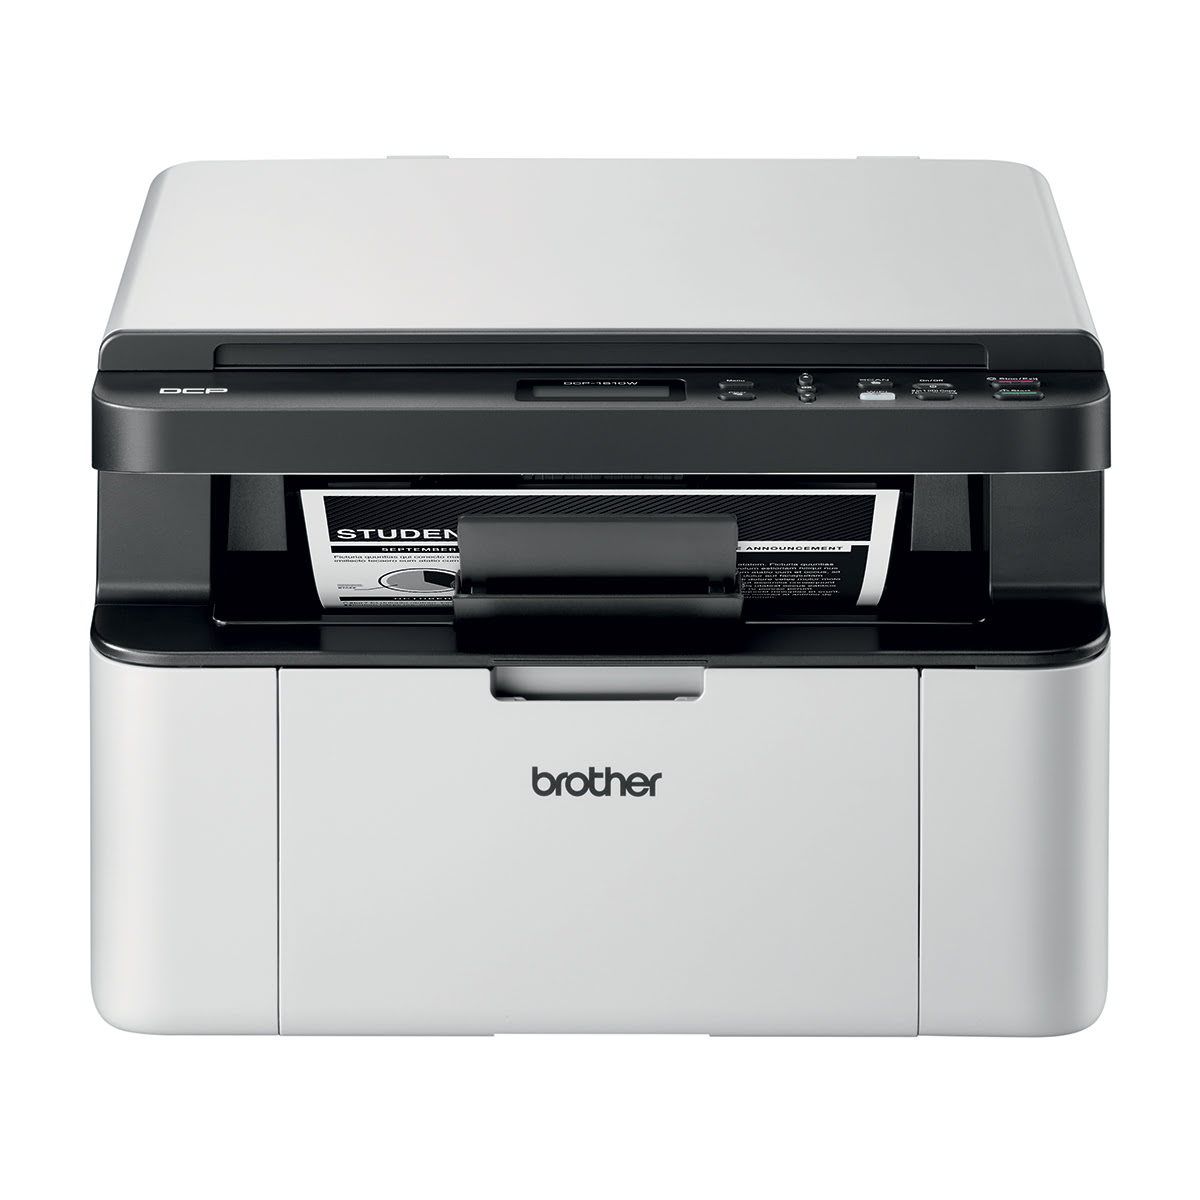 Imprimante multifonction Brother DCP-1610W - grosbill-pro.com - 0